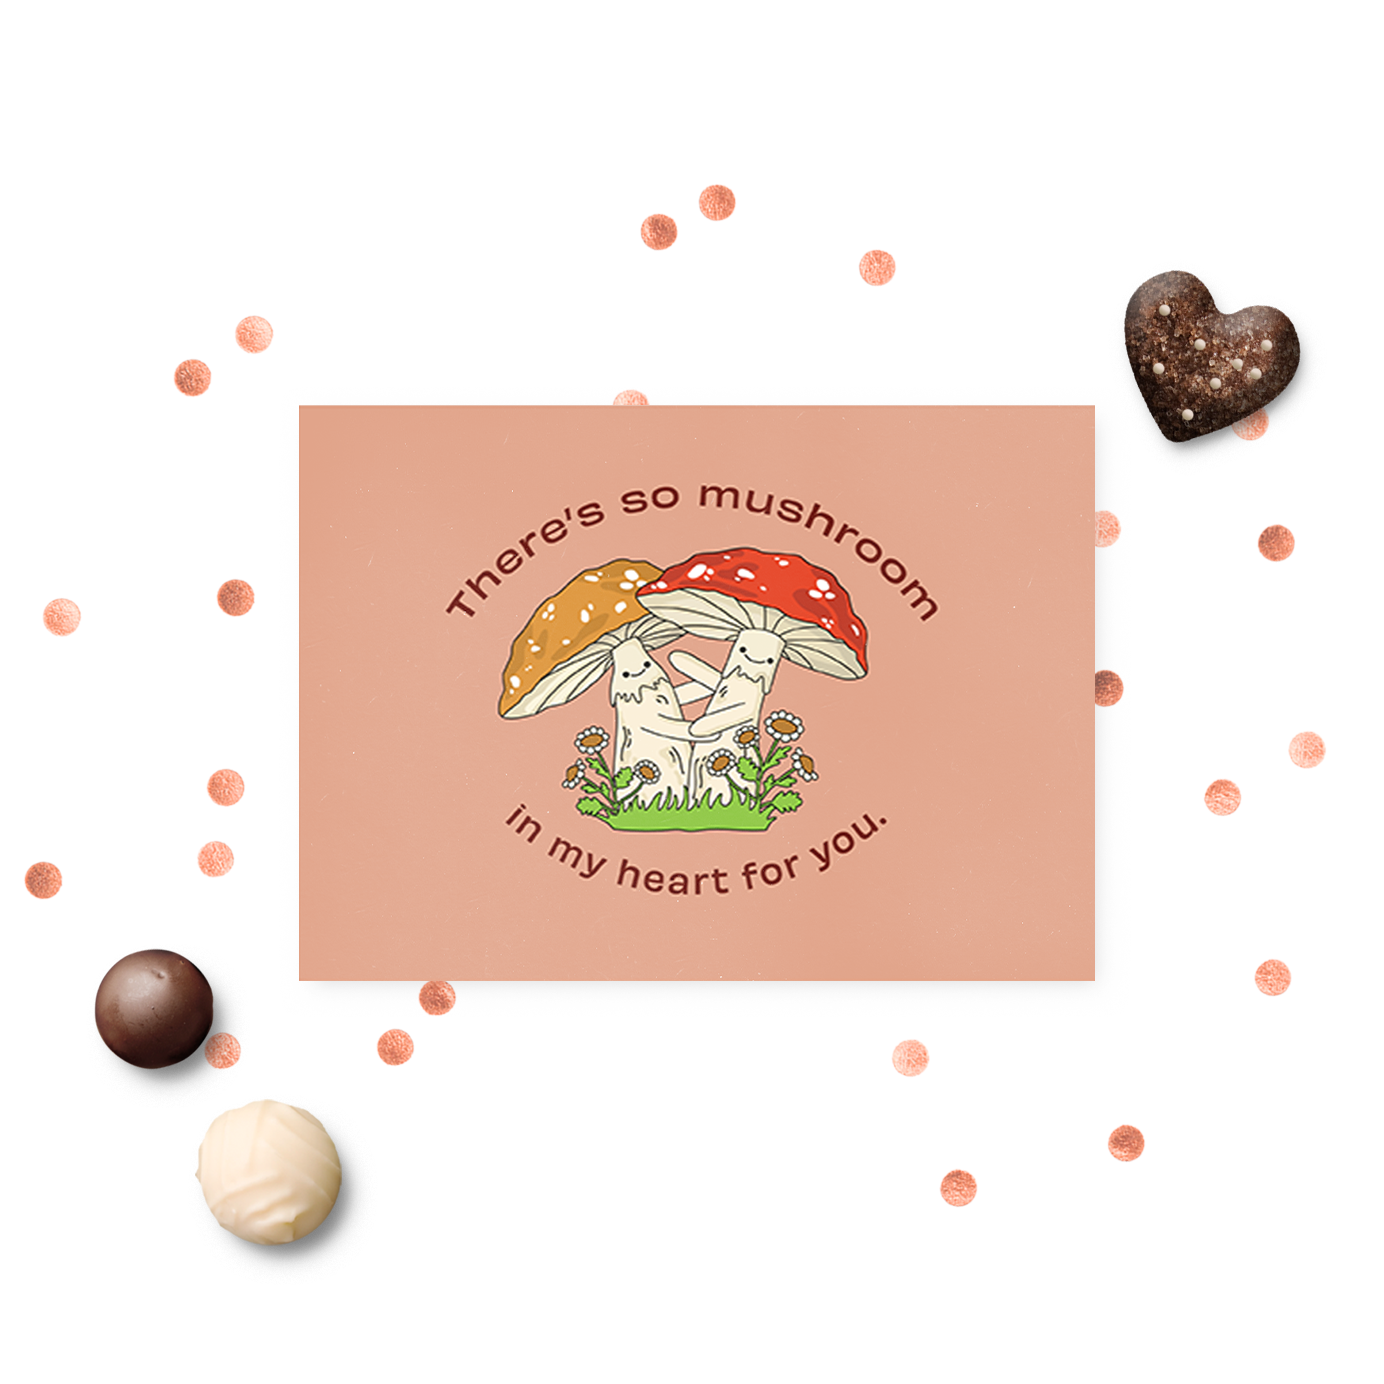 illustrations of mushrooms hugging, with text reading "there's so mushroom in my heart for you."